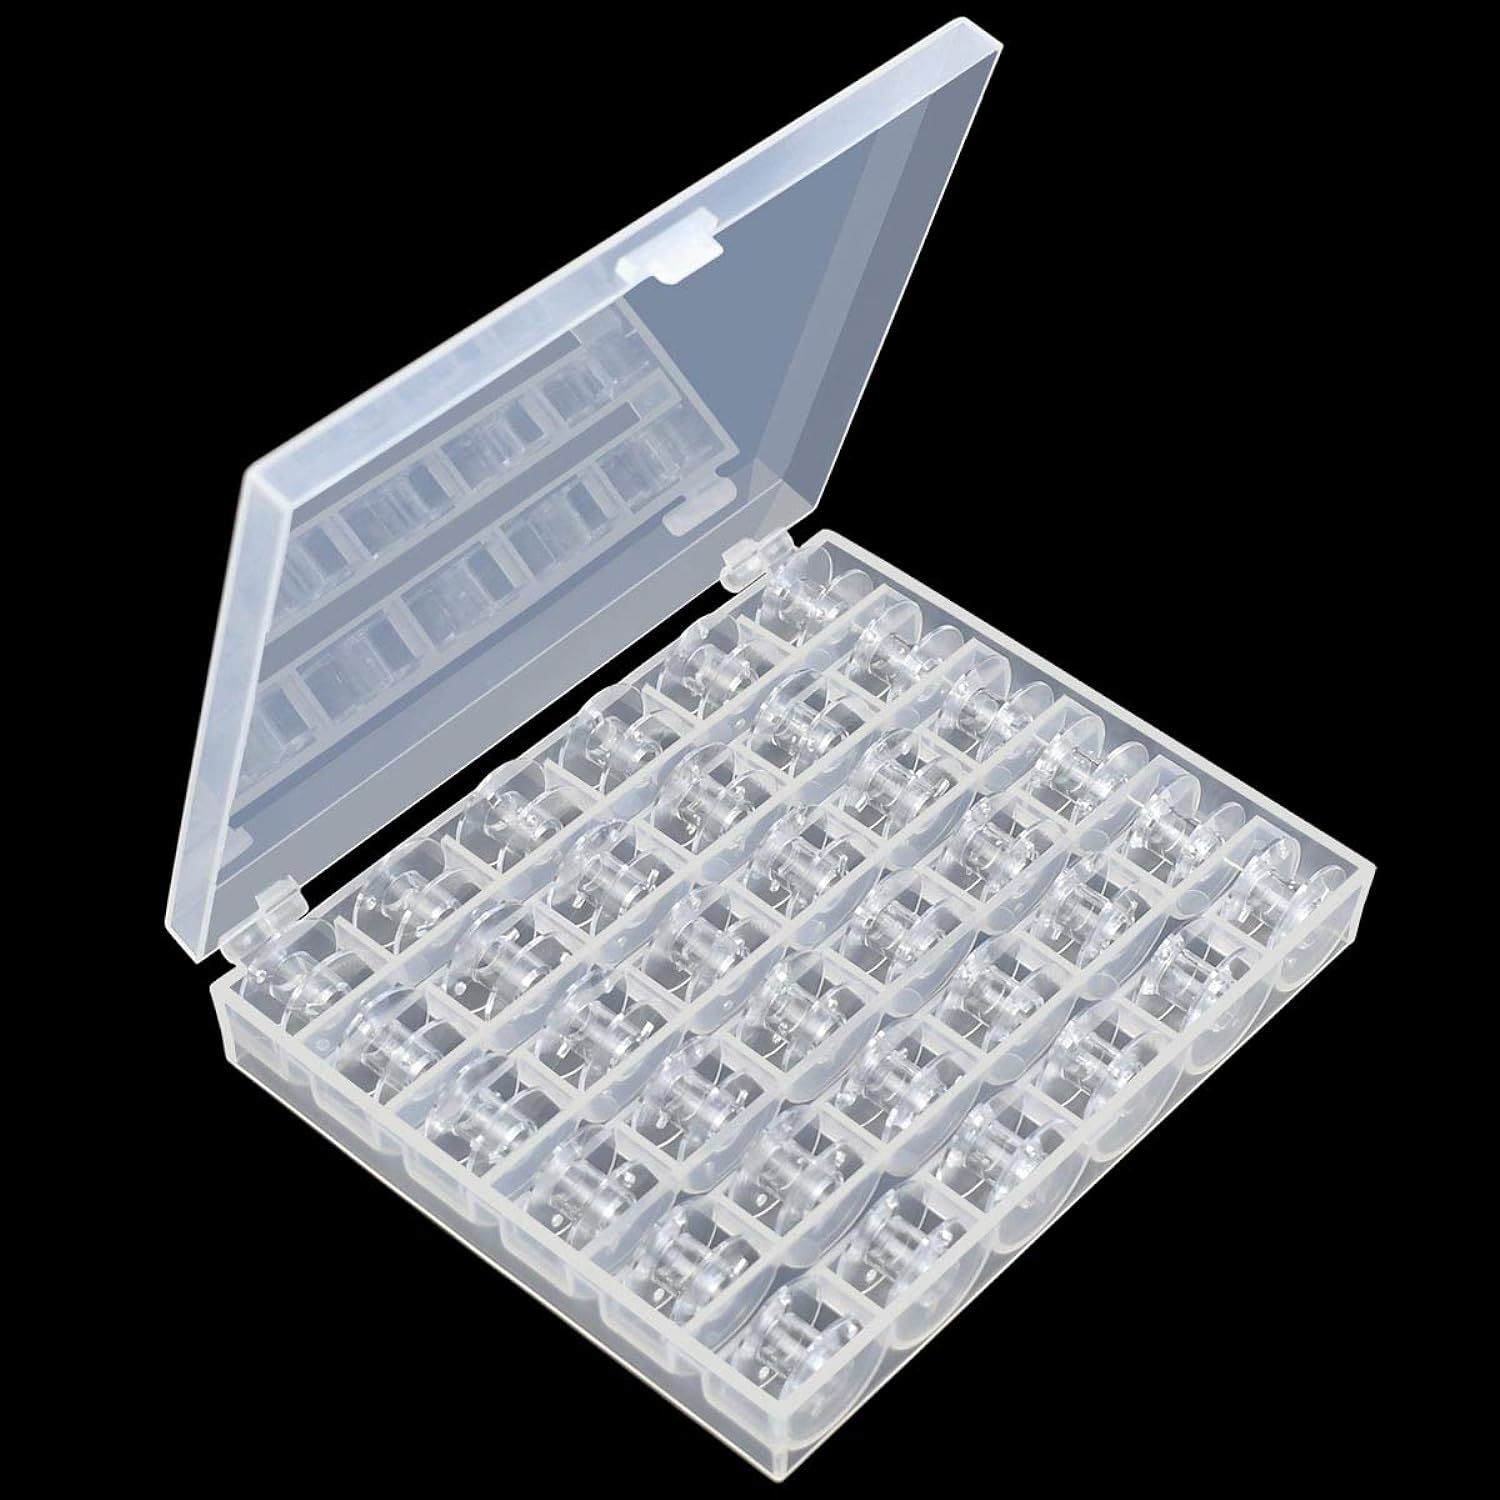 36 Pcs Transparent Plastic Sewing Machine Bobbins With Case For Janome Brother S - $13.99